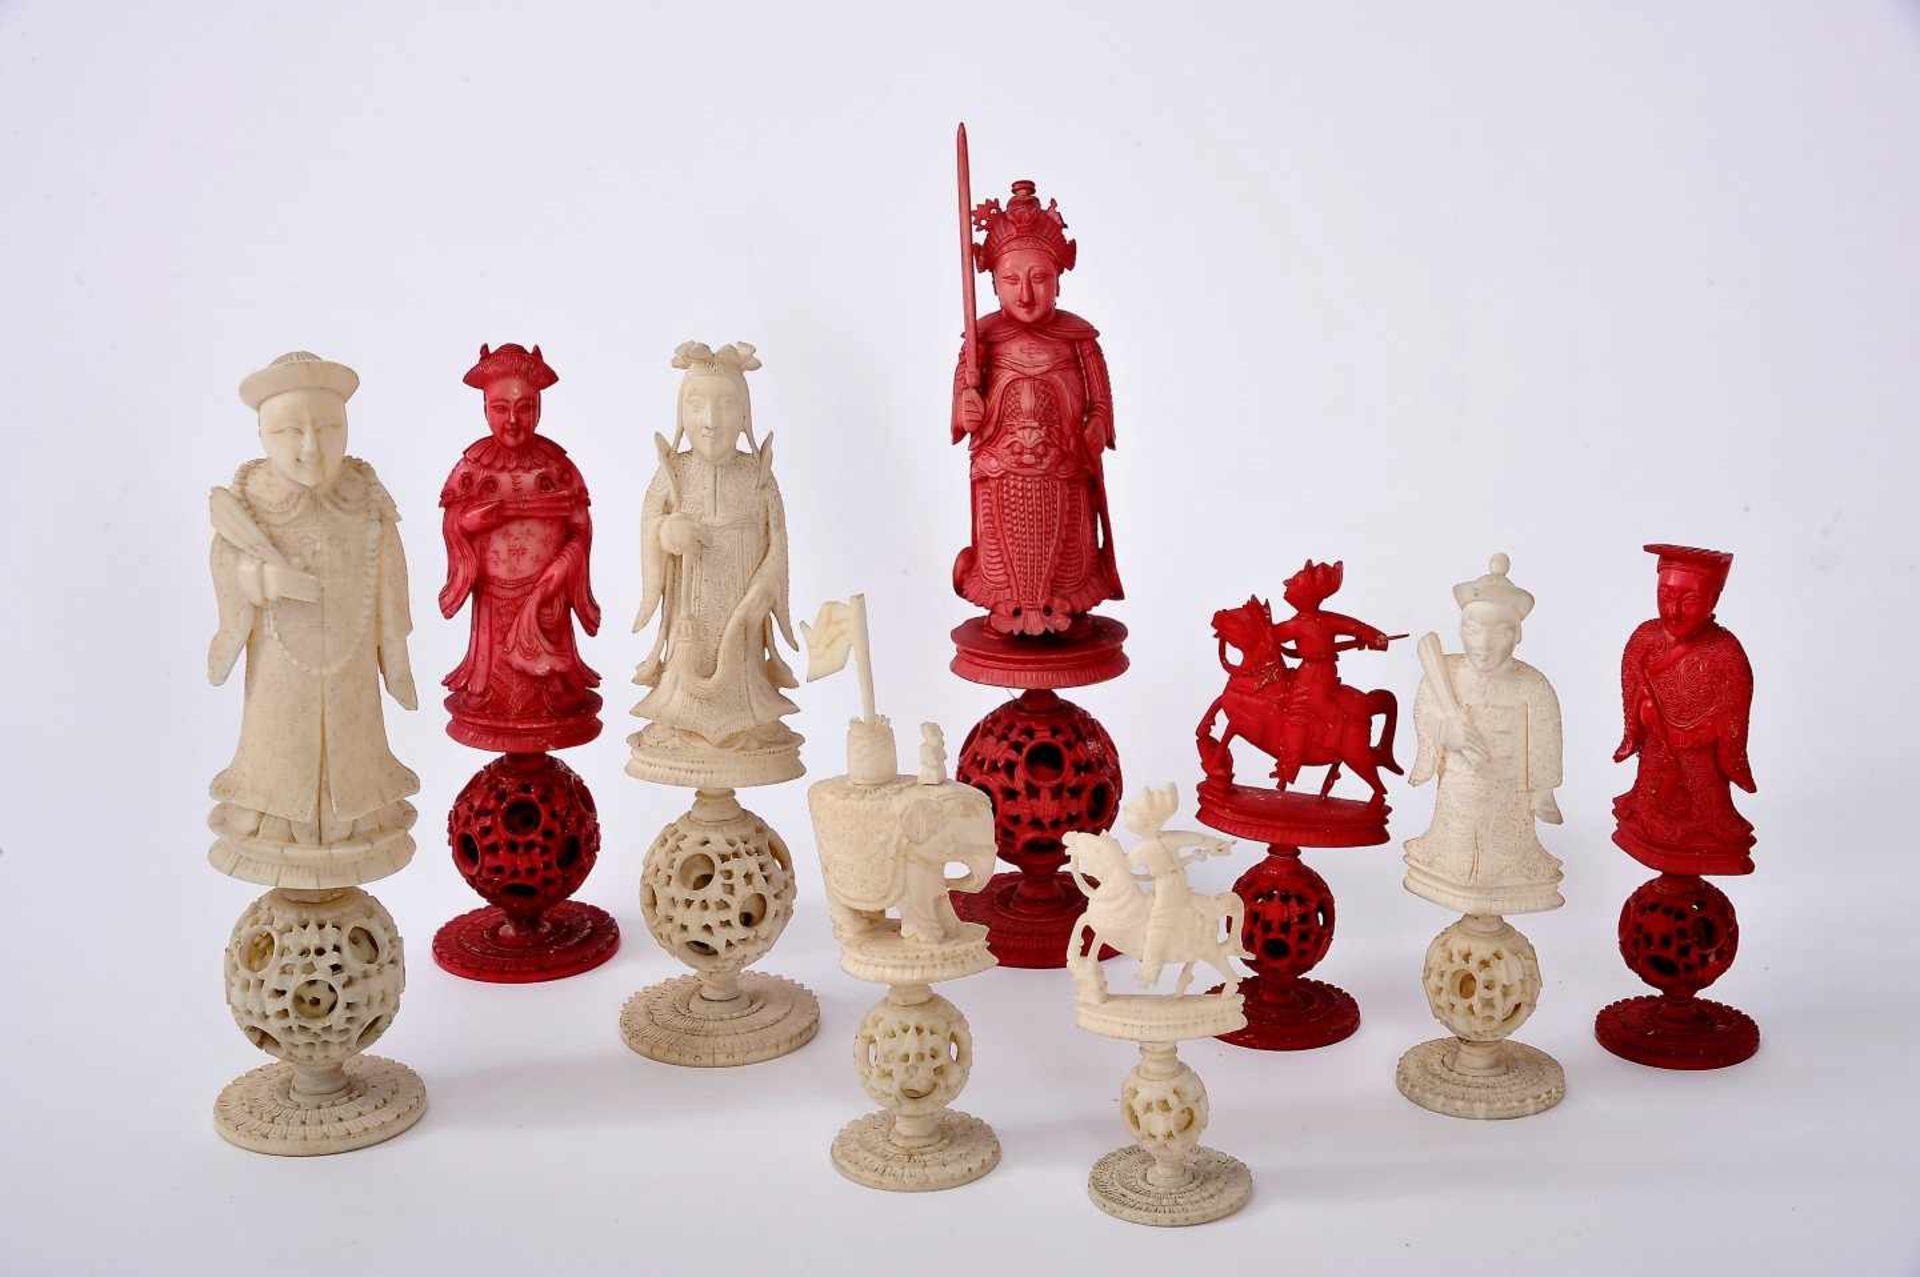 Chess PiecesChess Pieces, carved ivory with all the pieces based on "Ball of happiness", one of - Image 2 of 5